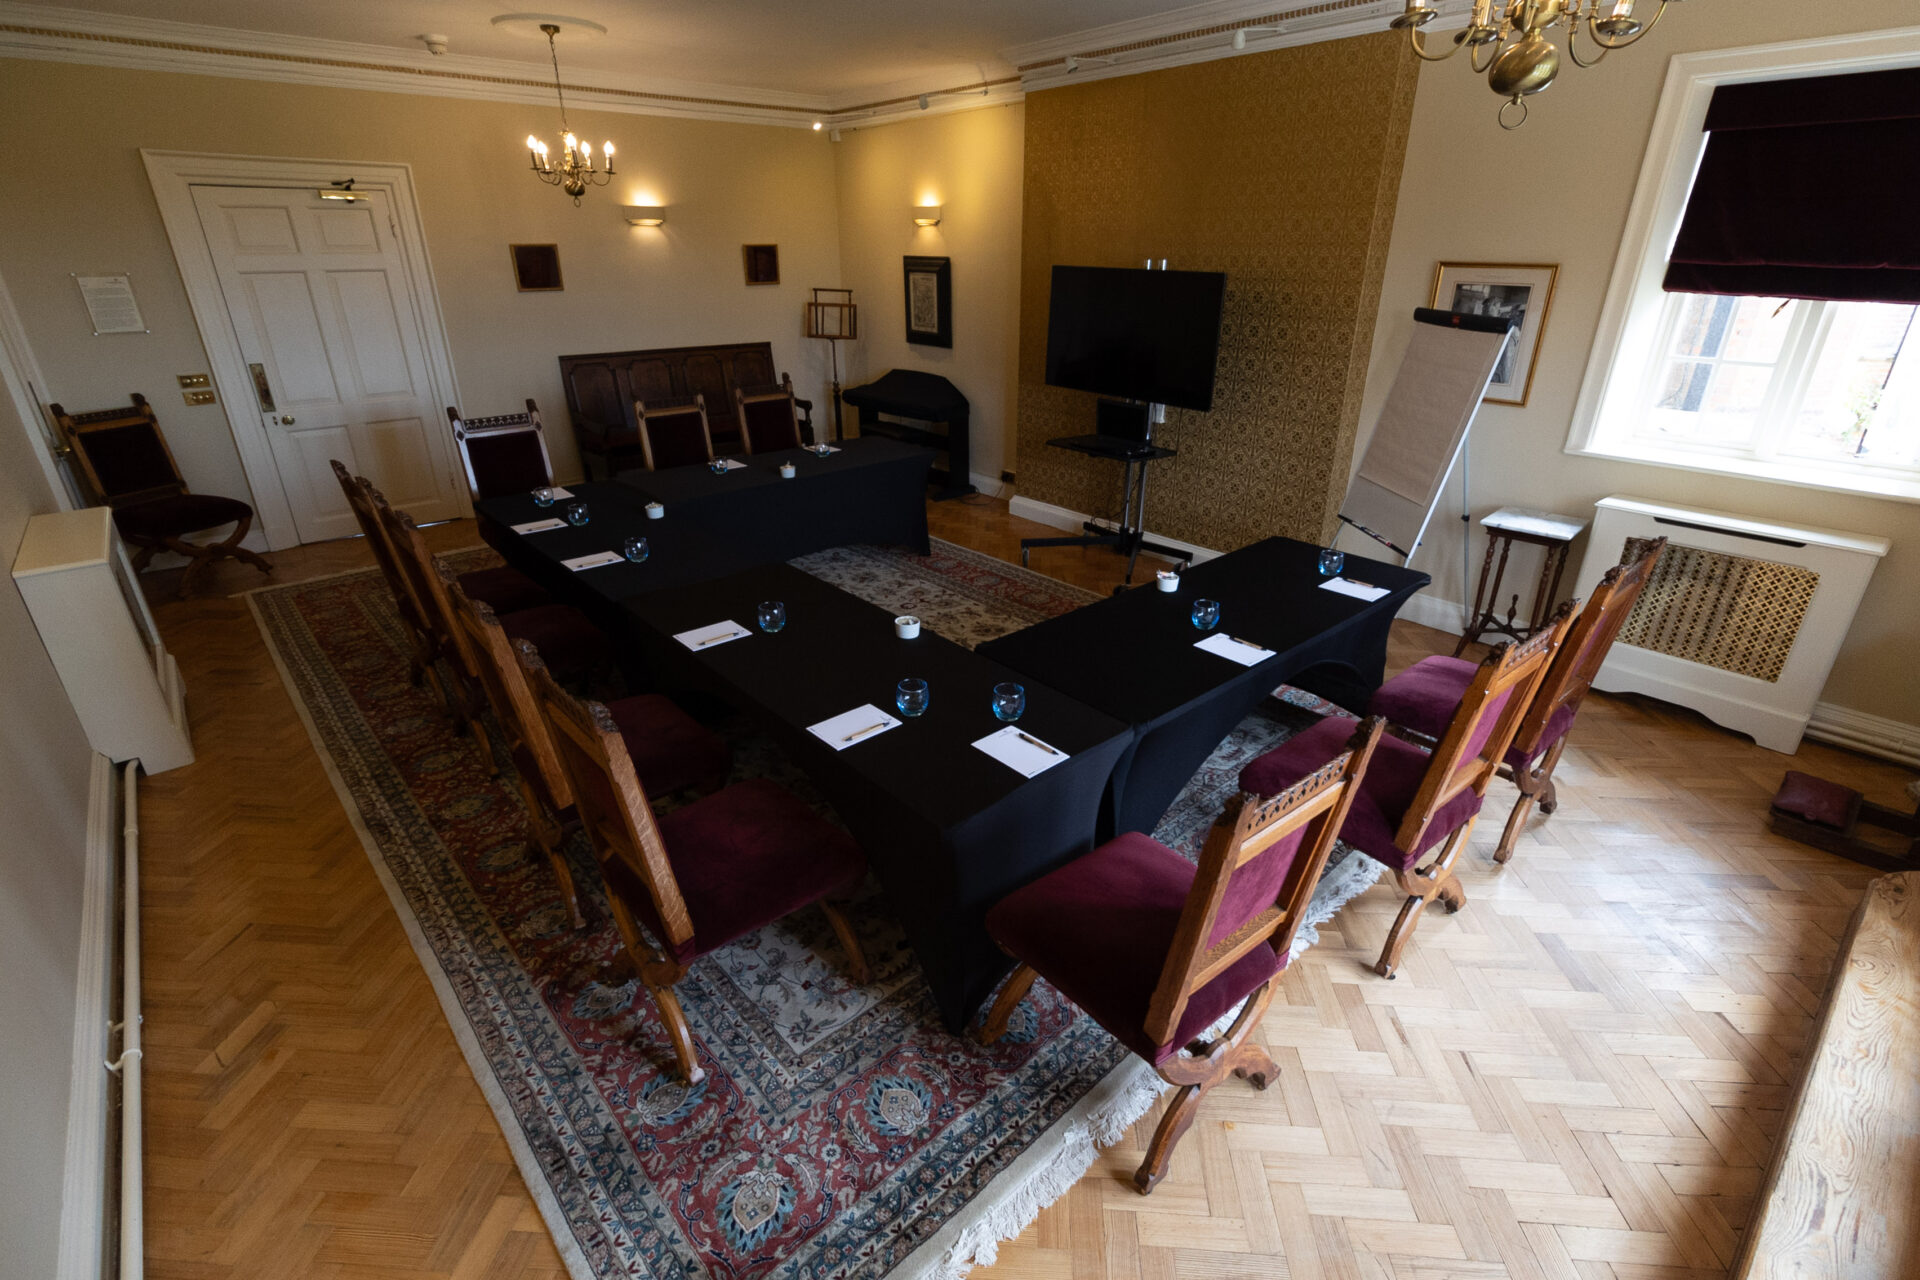 The Cumberland Lodge Chapel set up to seat ten people in a U-shape